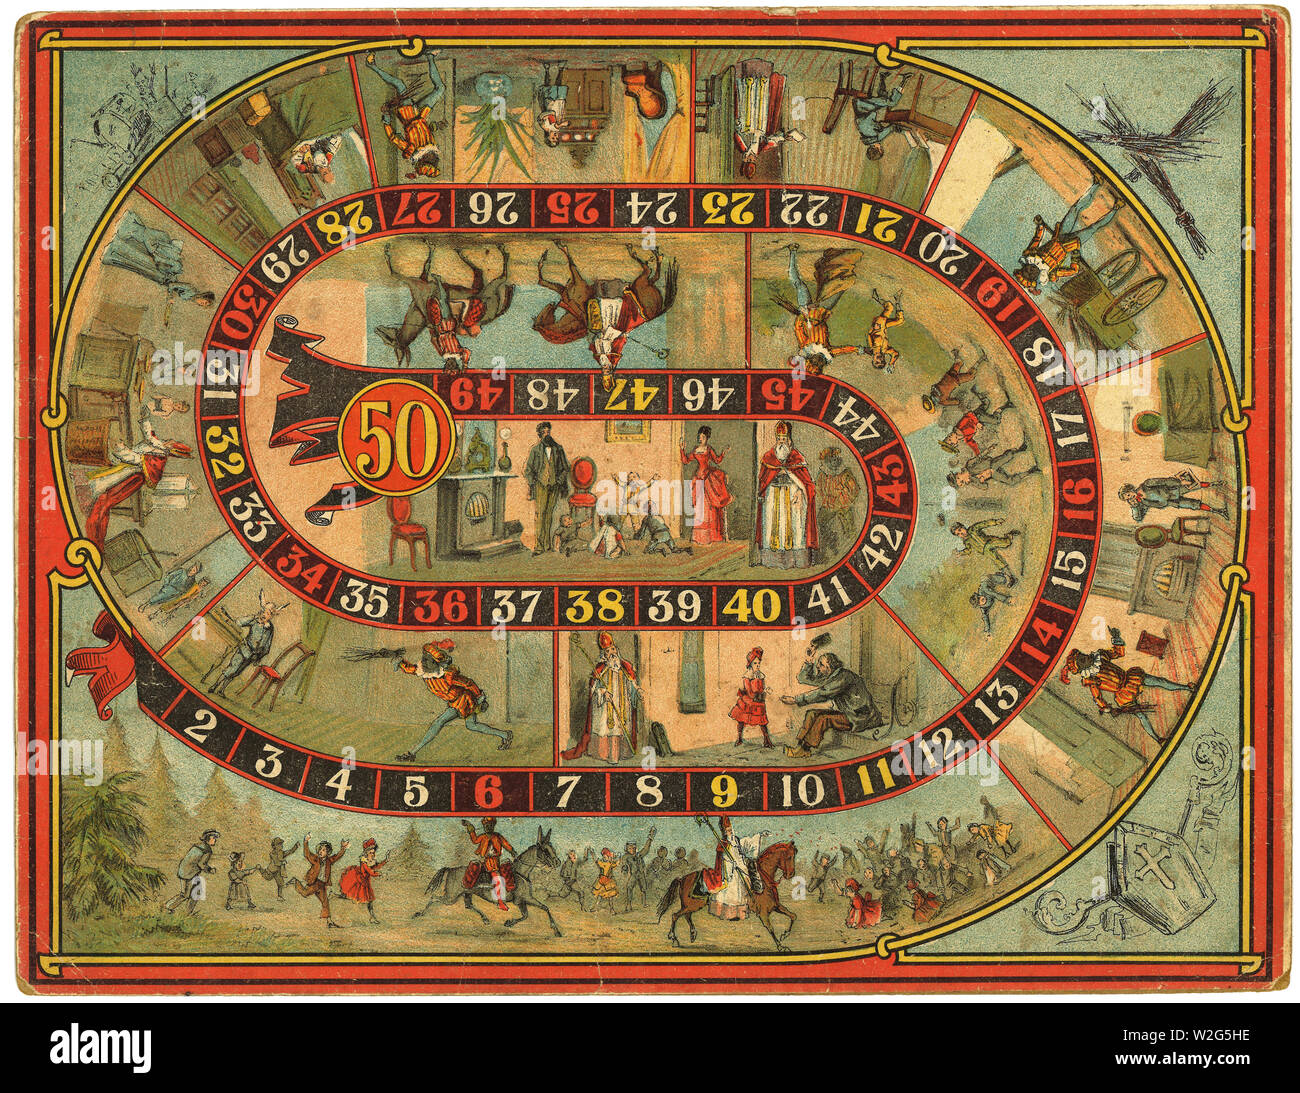 Historical St. Nicholas board game from Netherlands ca. late 19th century or early 20th century Stock Photo